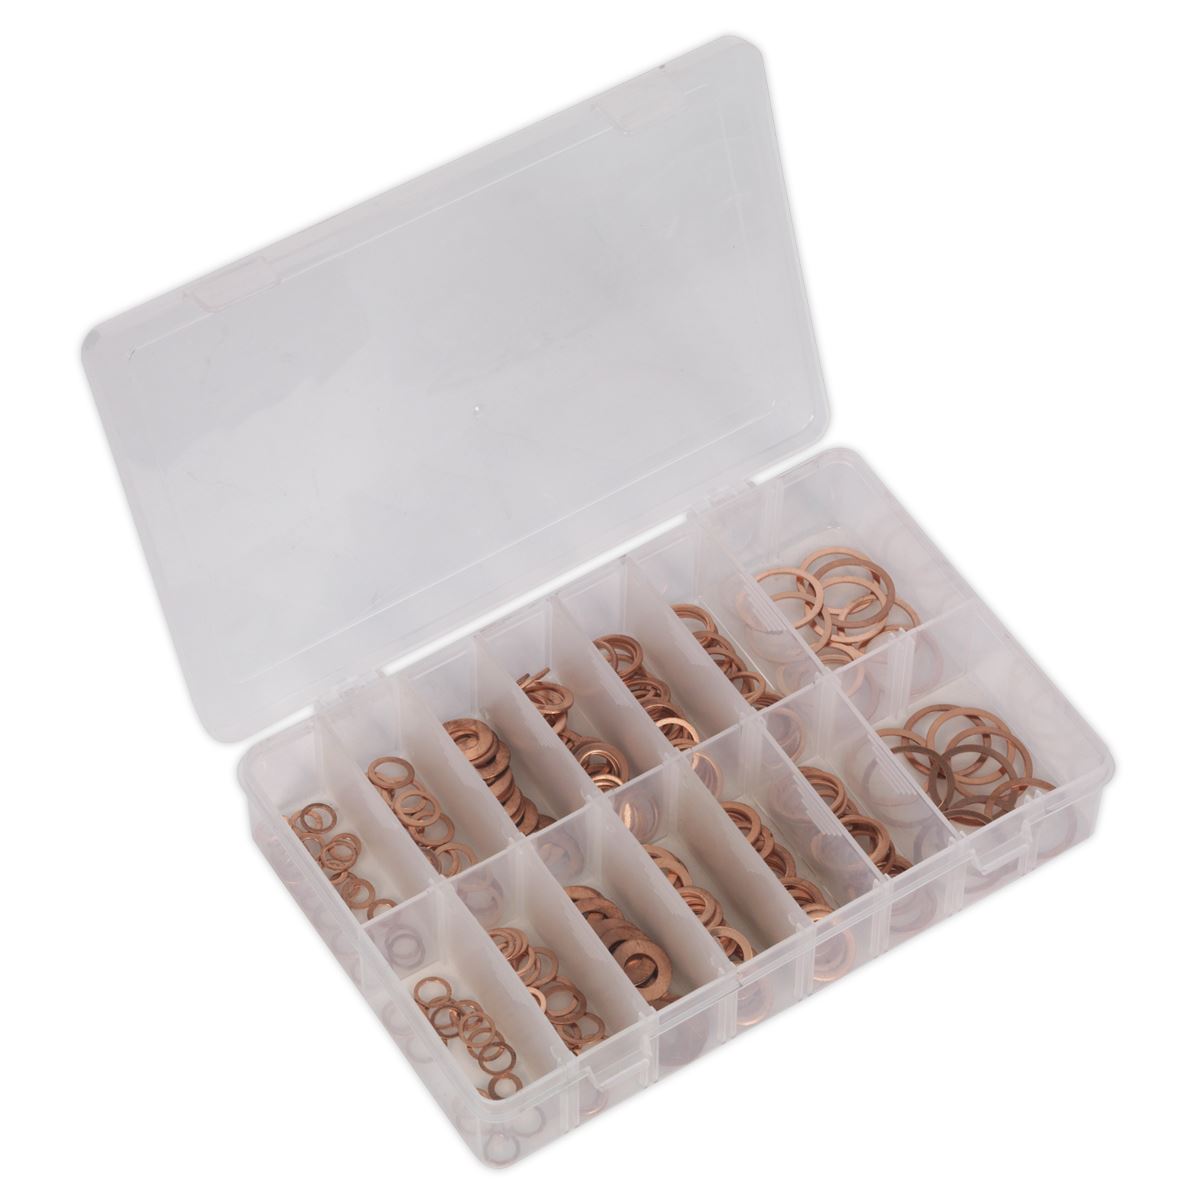 Sealey Diesel Injector Copper Washer Assortment 250pc - Metric